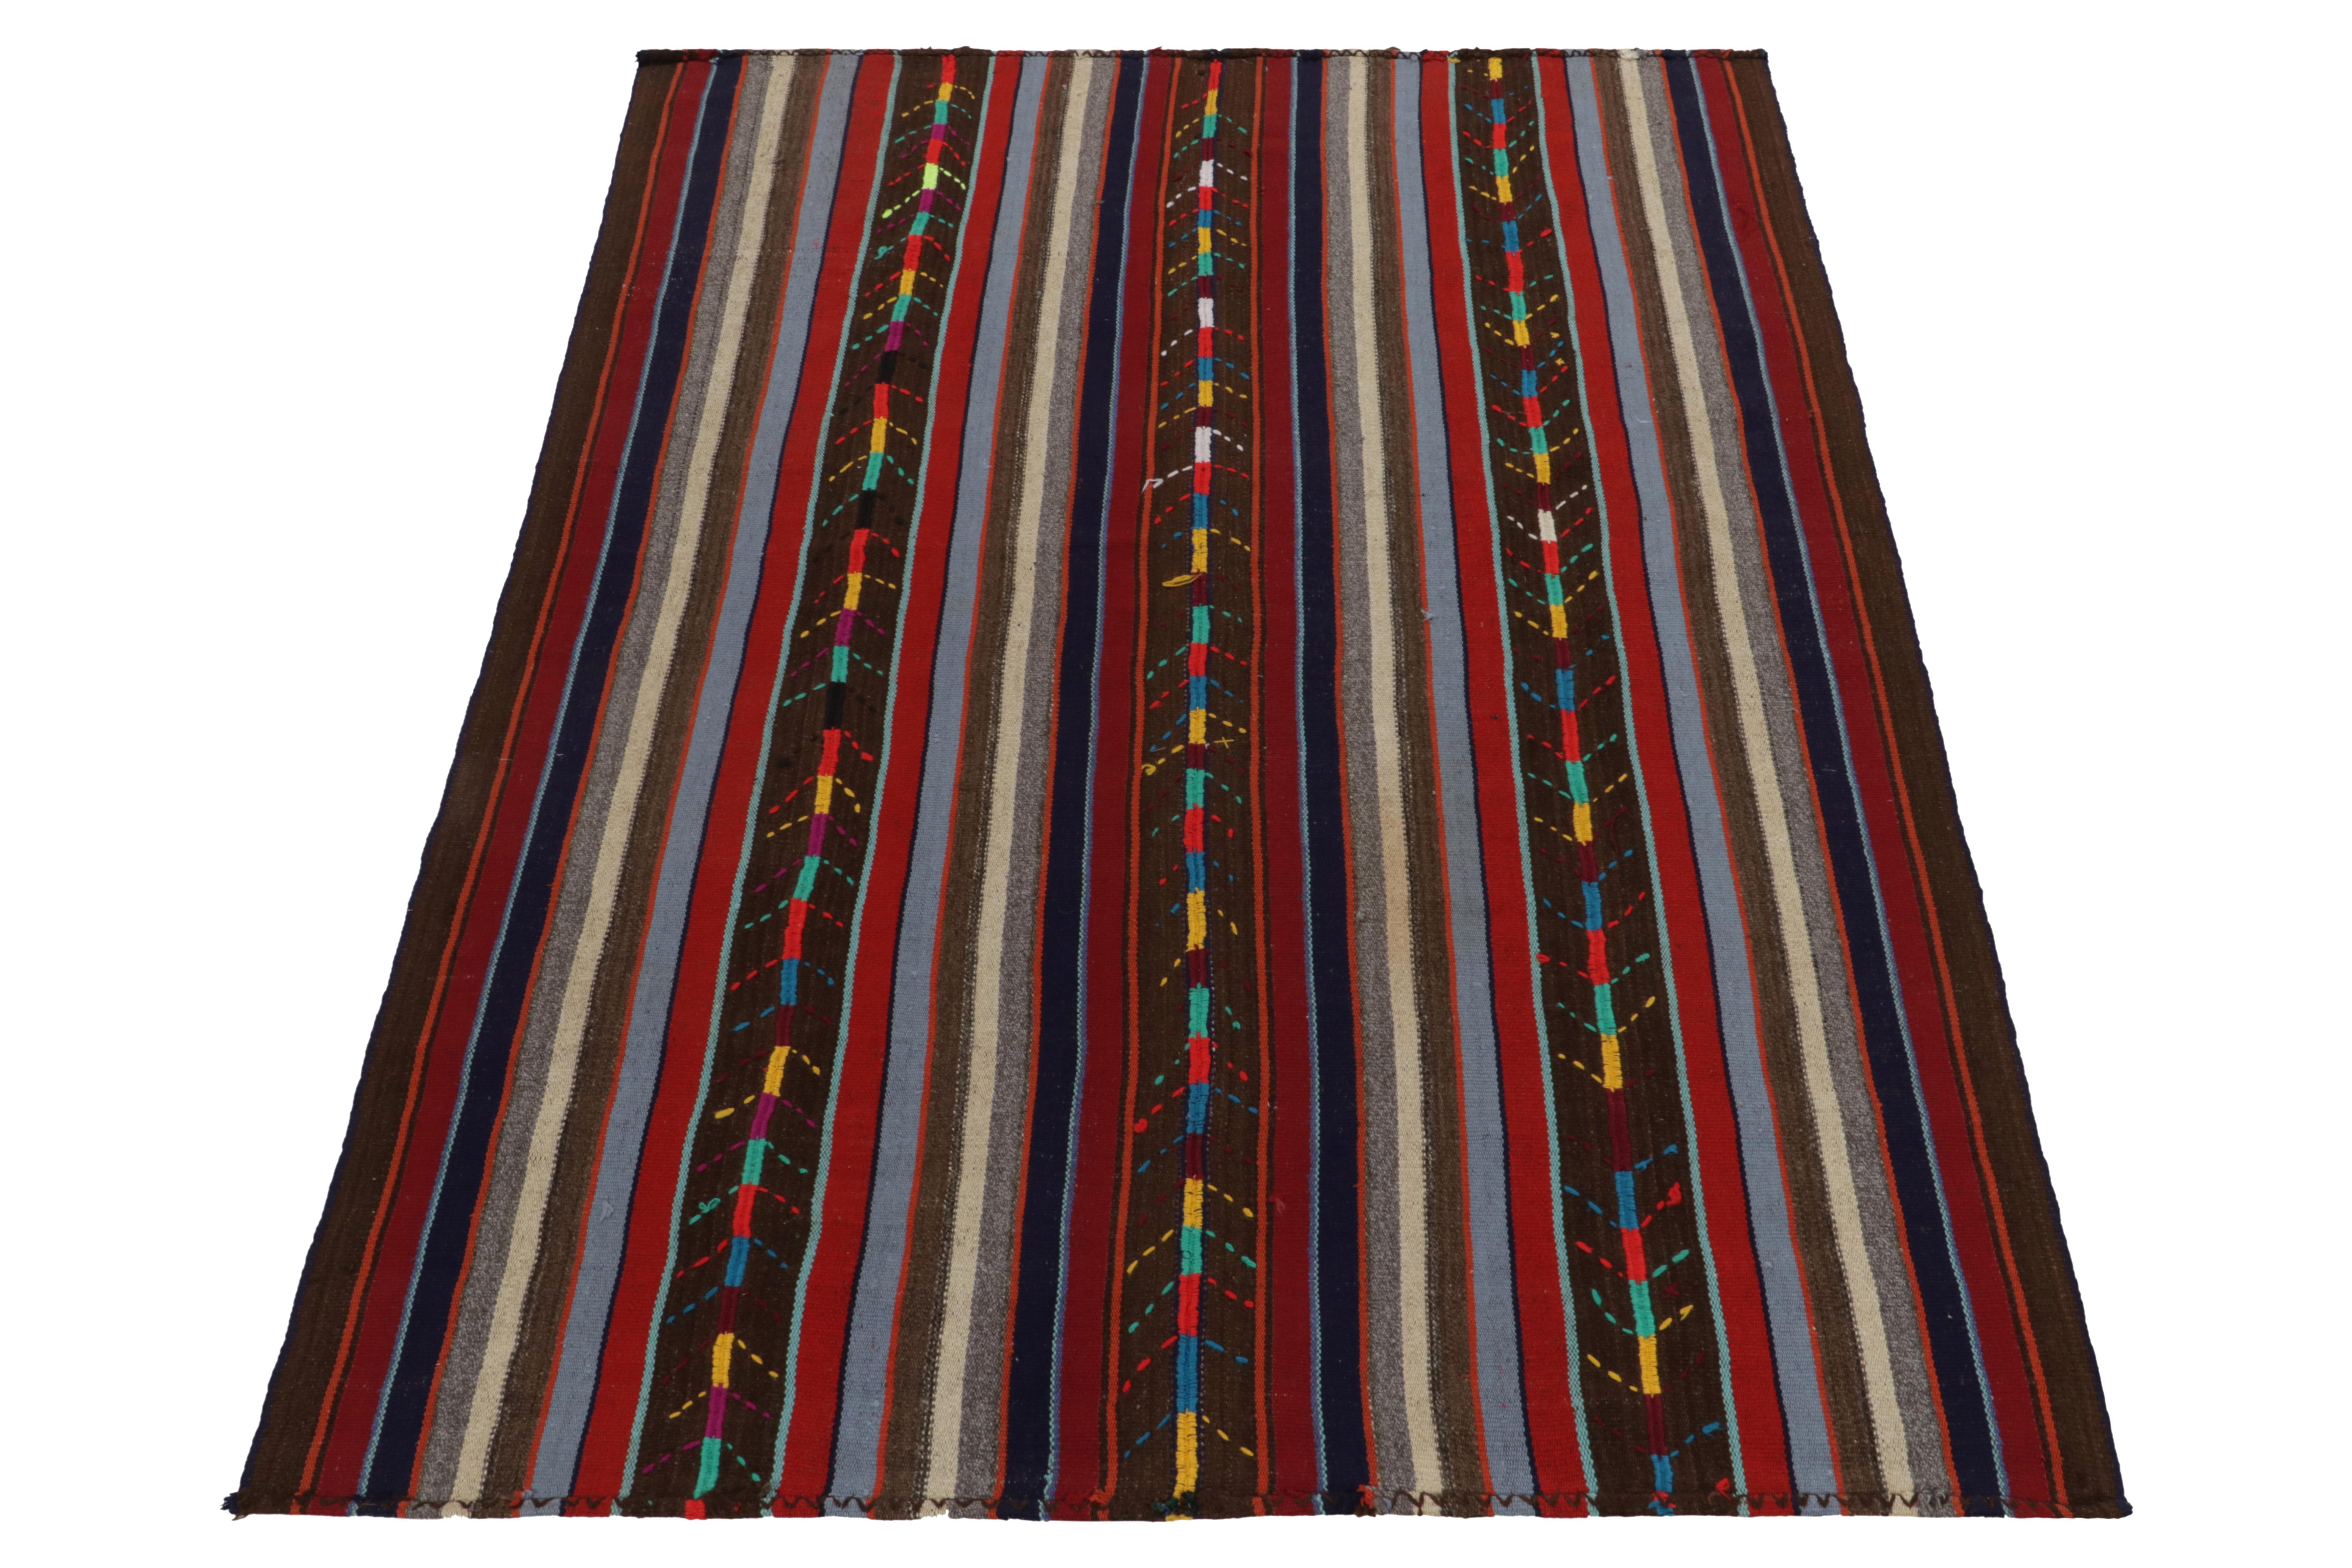 Handwoven in Turkey circa 1950-1960, this 6x8 vintage Chaput style Kilim rug enjoys a one of a kind approach in weaving. Featuring polychromatic striations in brown, red, white, blue, the flatweave dons a mature appeal seldom seen in this style.